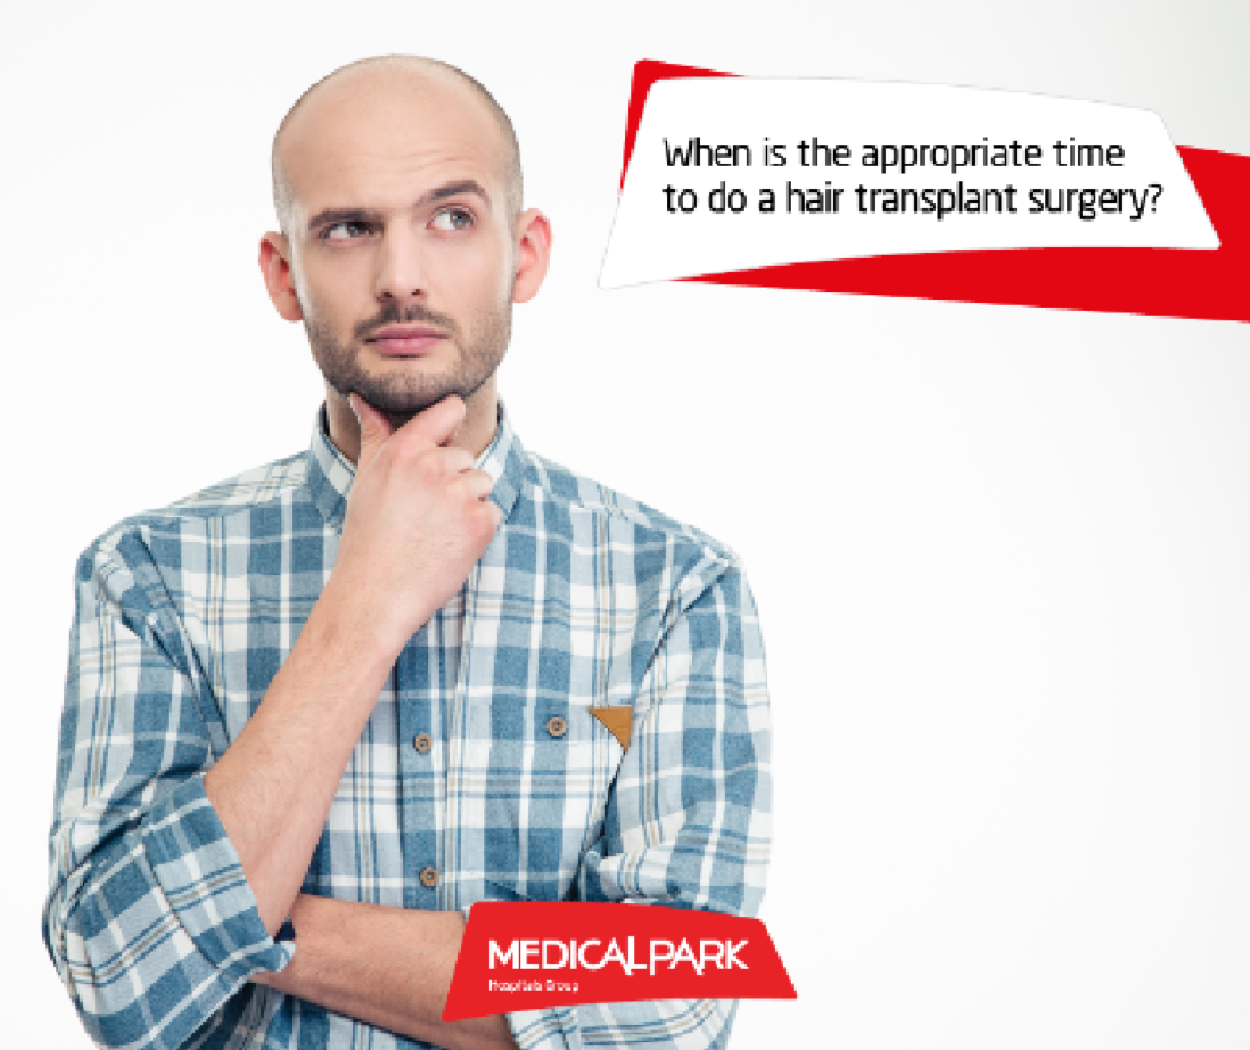 When is the appropriate time to do a hair transplant surgery?